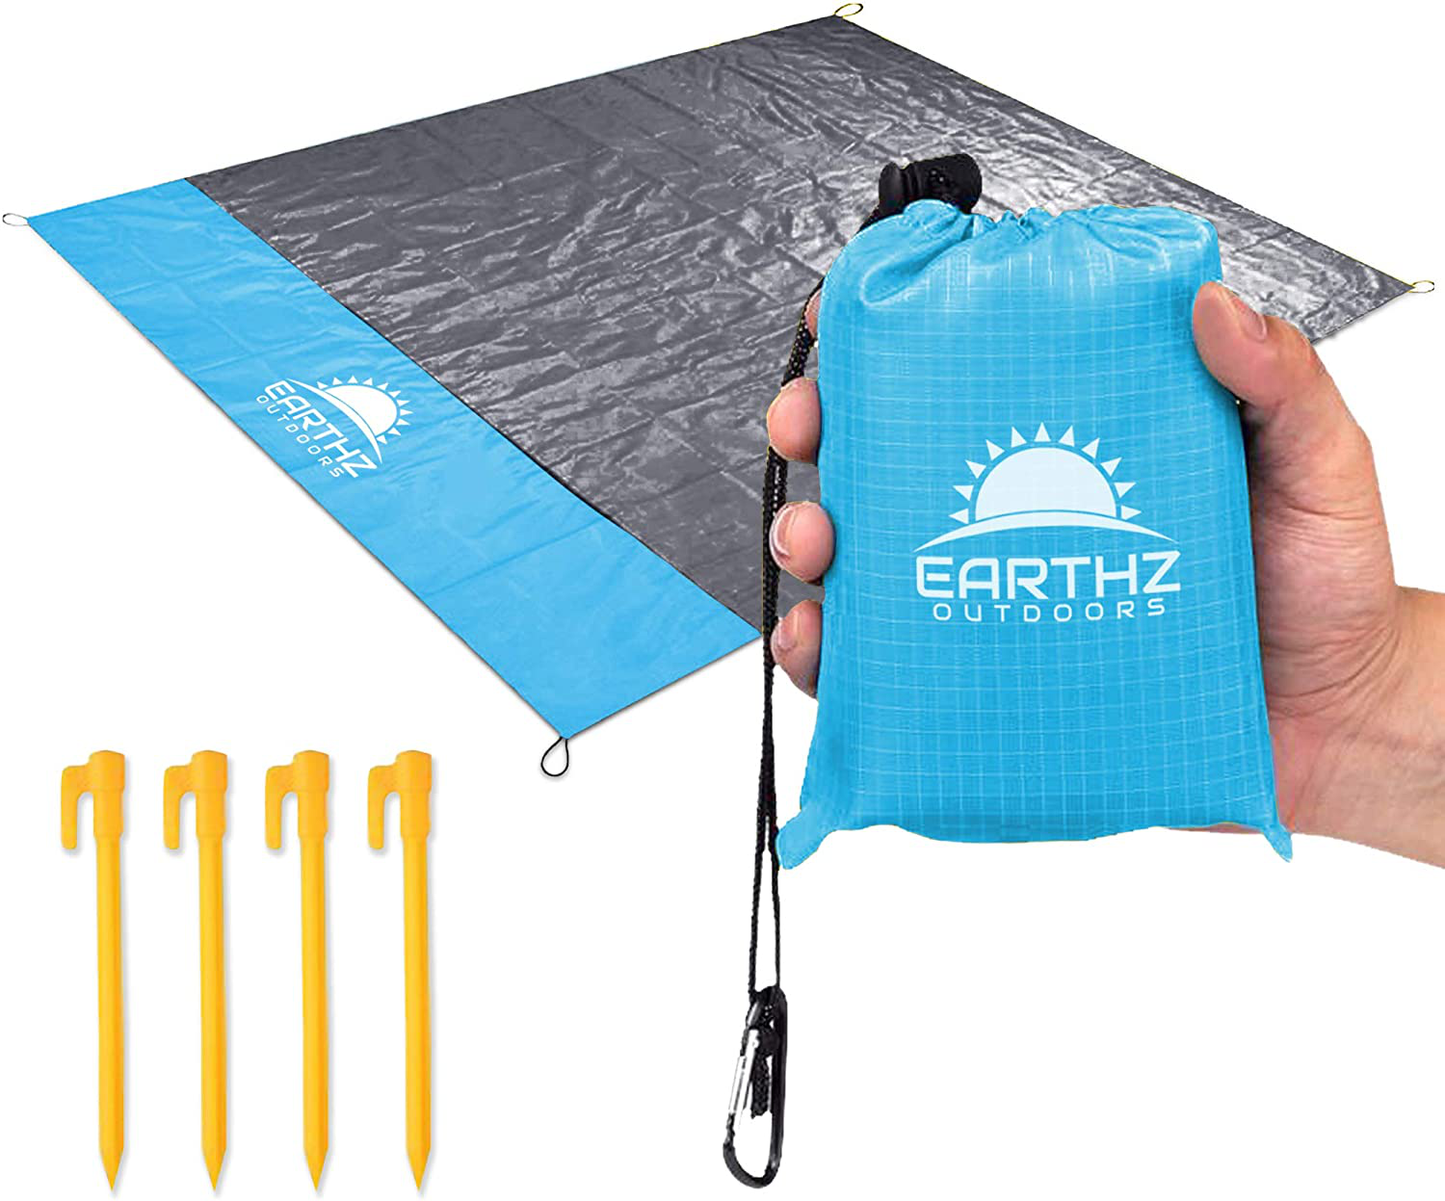 EARTHZ Pocket Blanket Waterproof, Compact Packable Blanket Outdoor - Small Portable Picnic Mat Waterproof for Beach, Travel, Festival, Hiking, Camping